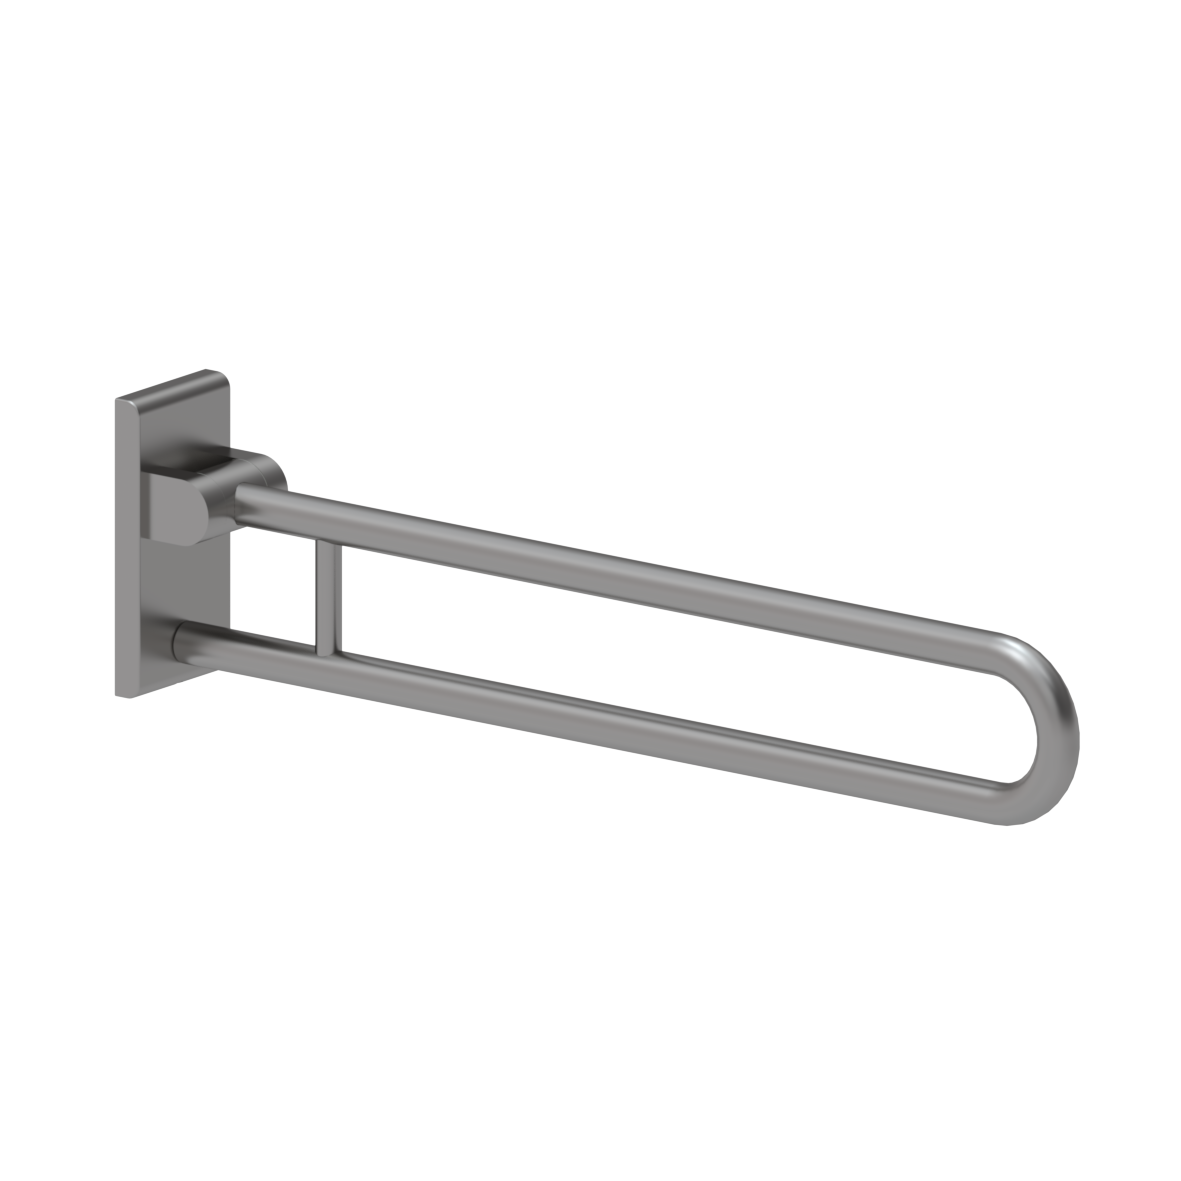 Inox Care Lift-up support rail vario, with base plate, left and right, L = 850 mm, Stainless steel